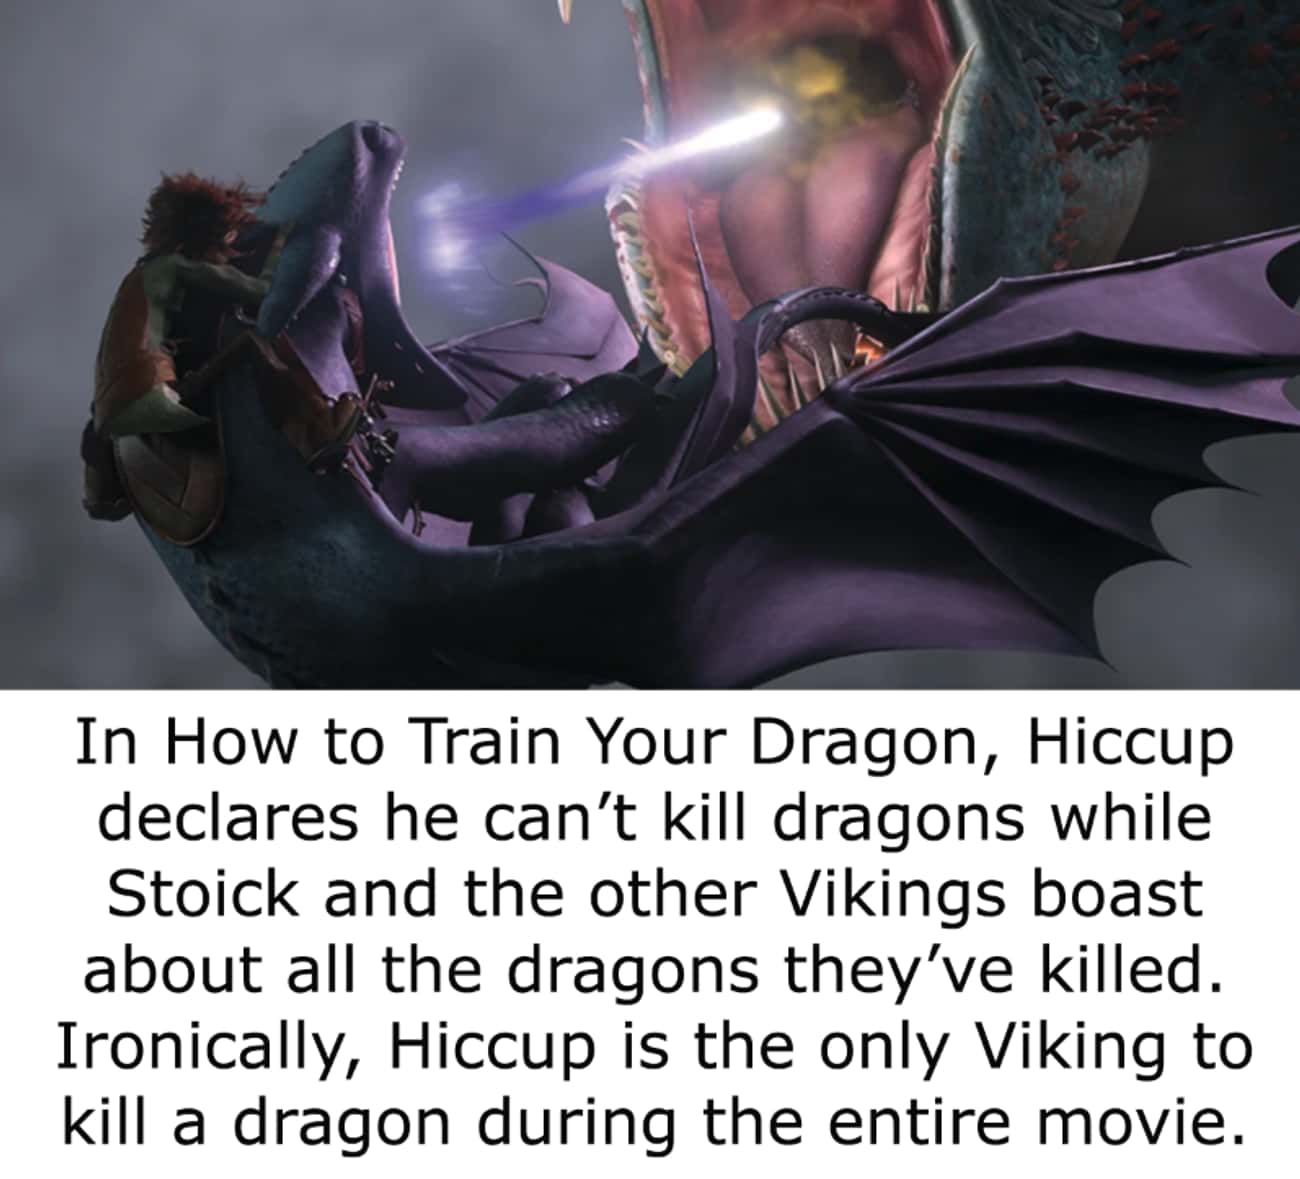 Hiccup Is The Only Viking We Actually See Slay A Dragon